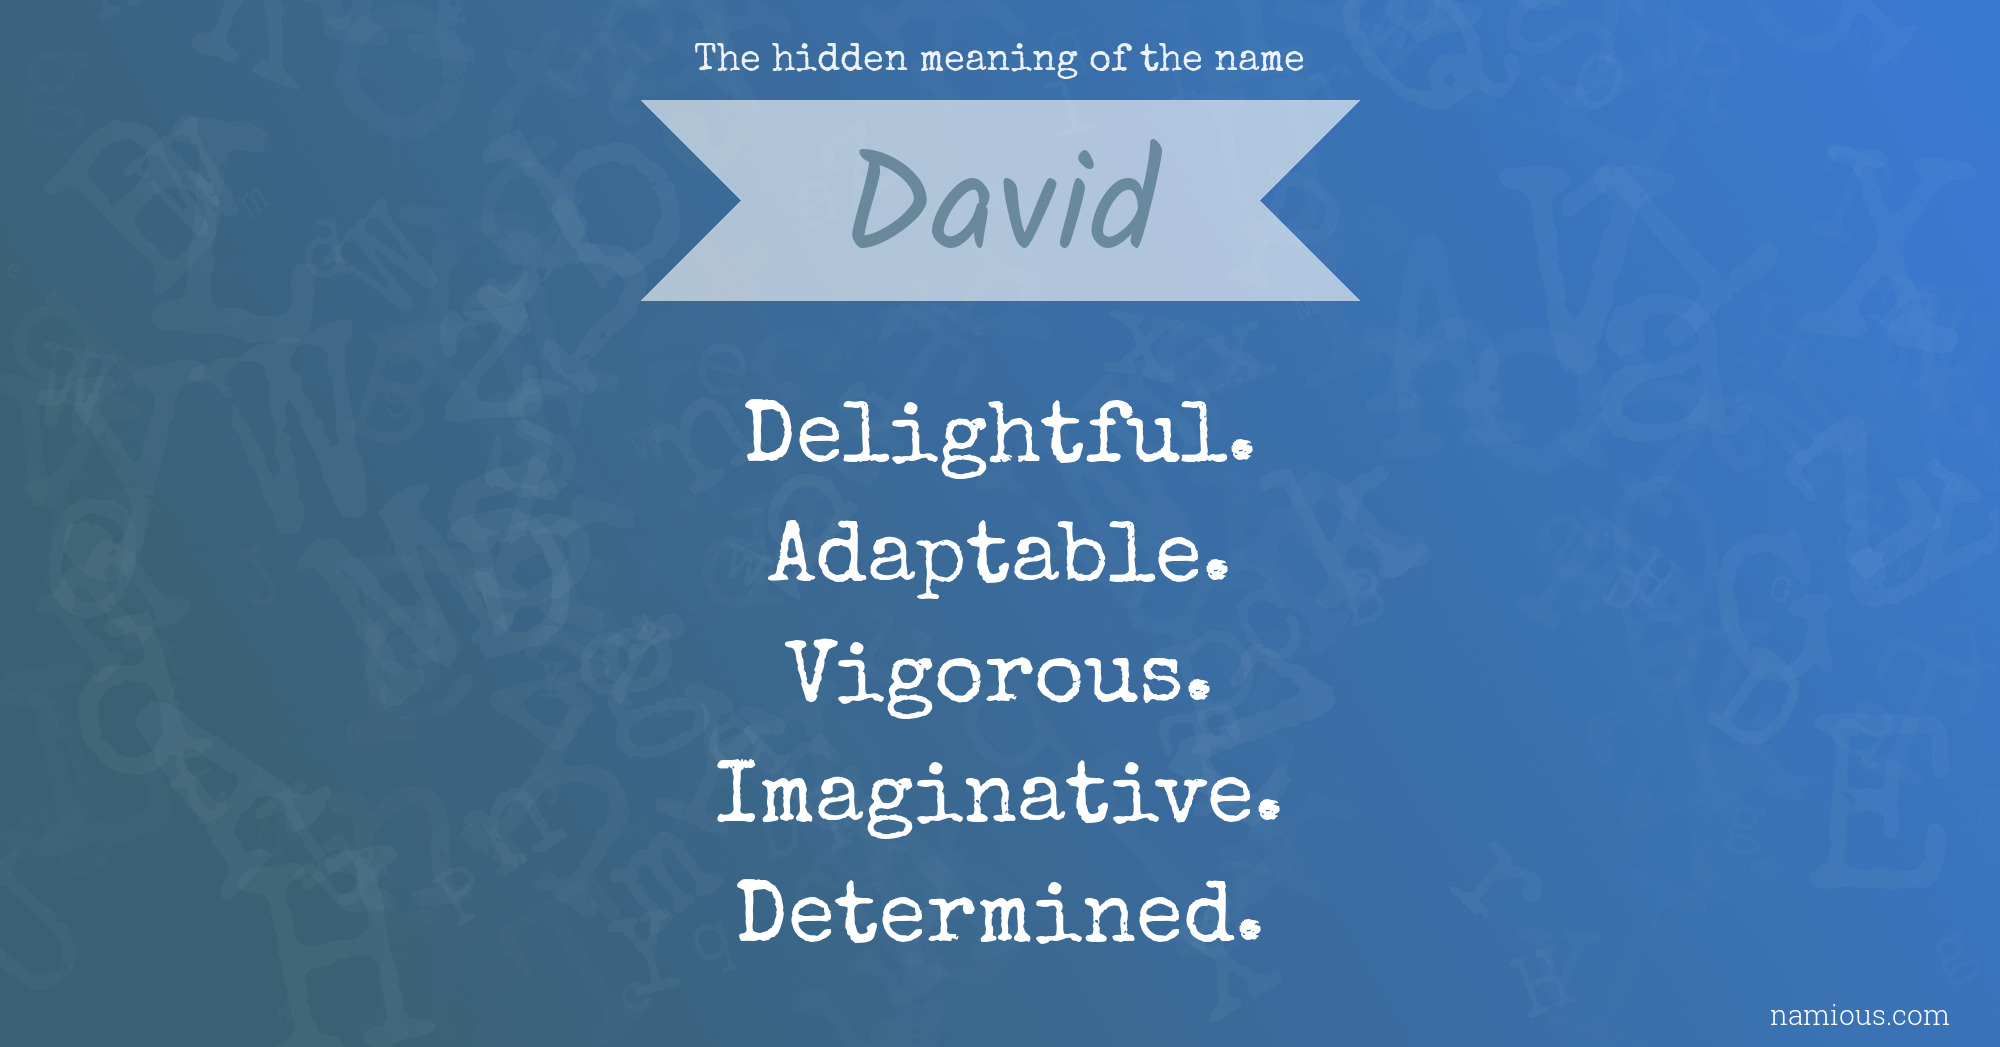 what does the name of david mean